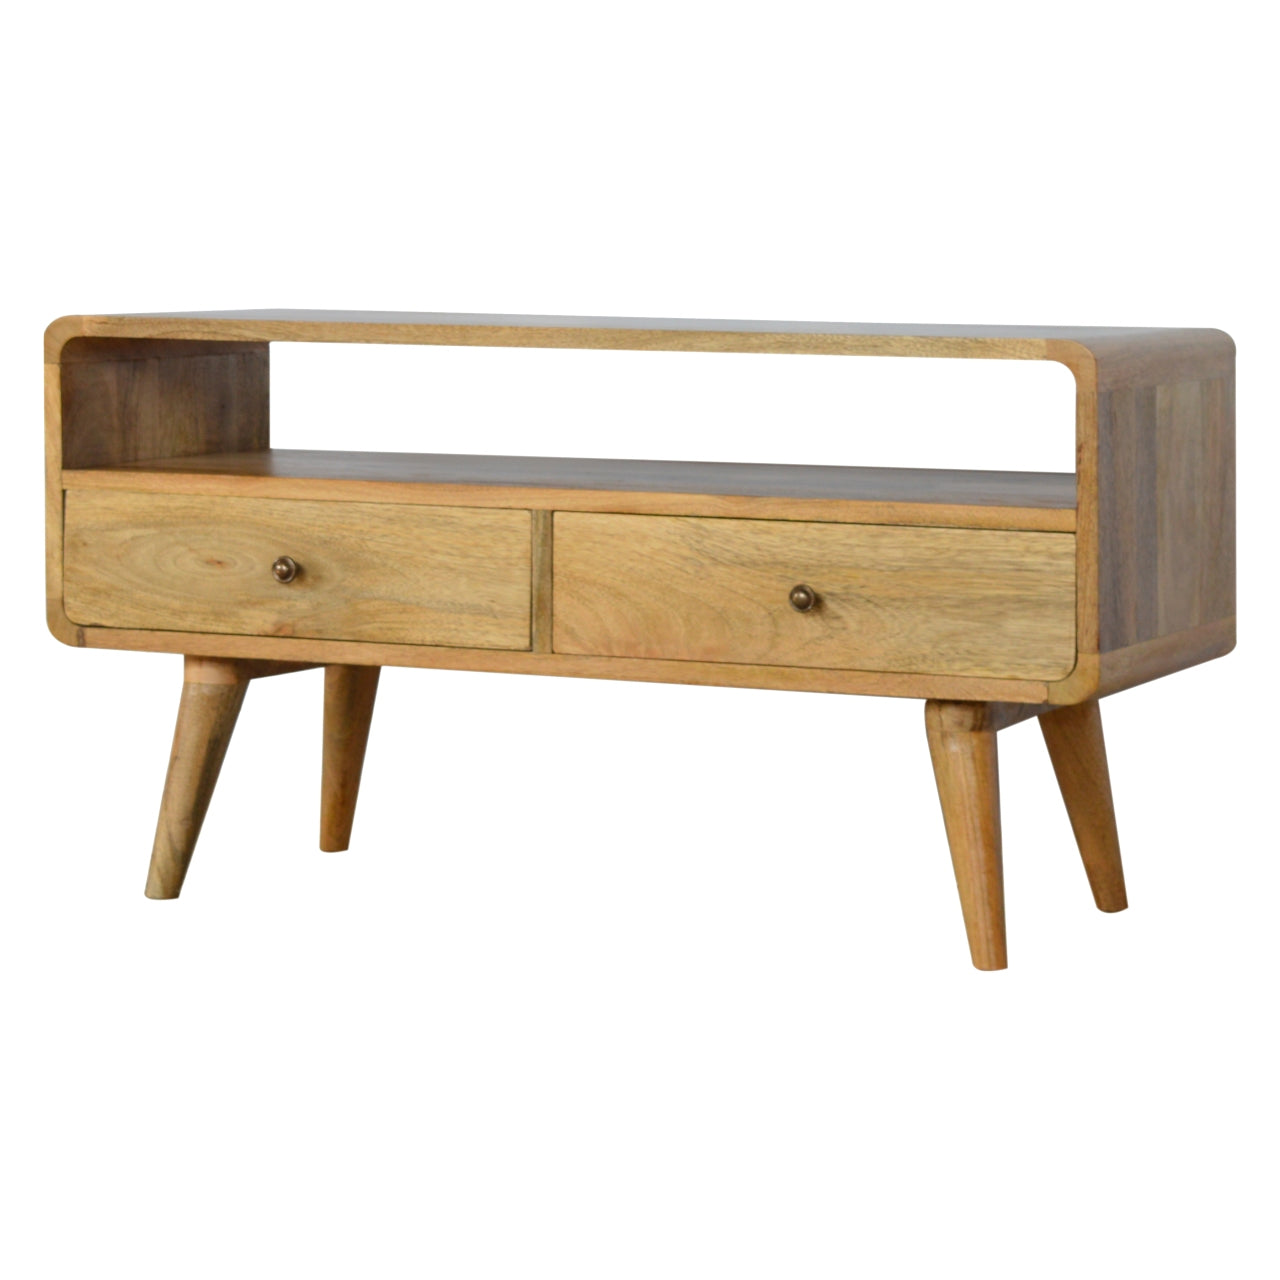 Modal Handmade Solid Wood TV Stand with 2 Drawers and an Open Slot in Natural Oak-ish finish | malletandplane.com